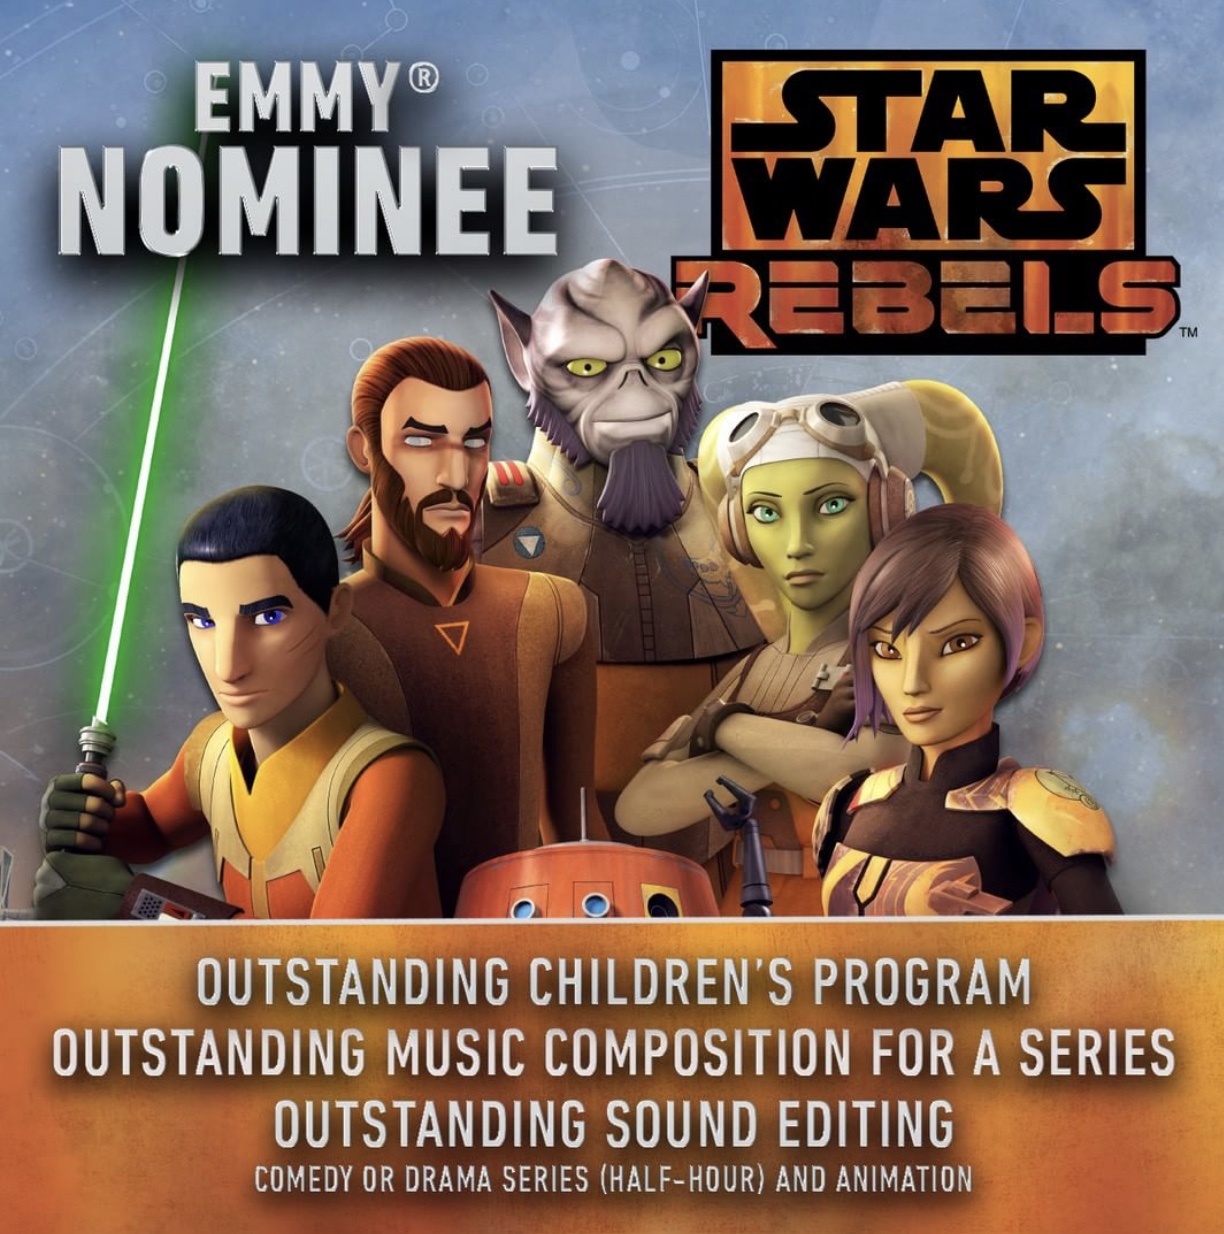 Star Wars Rebels Has Been Nominated for an Emmy